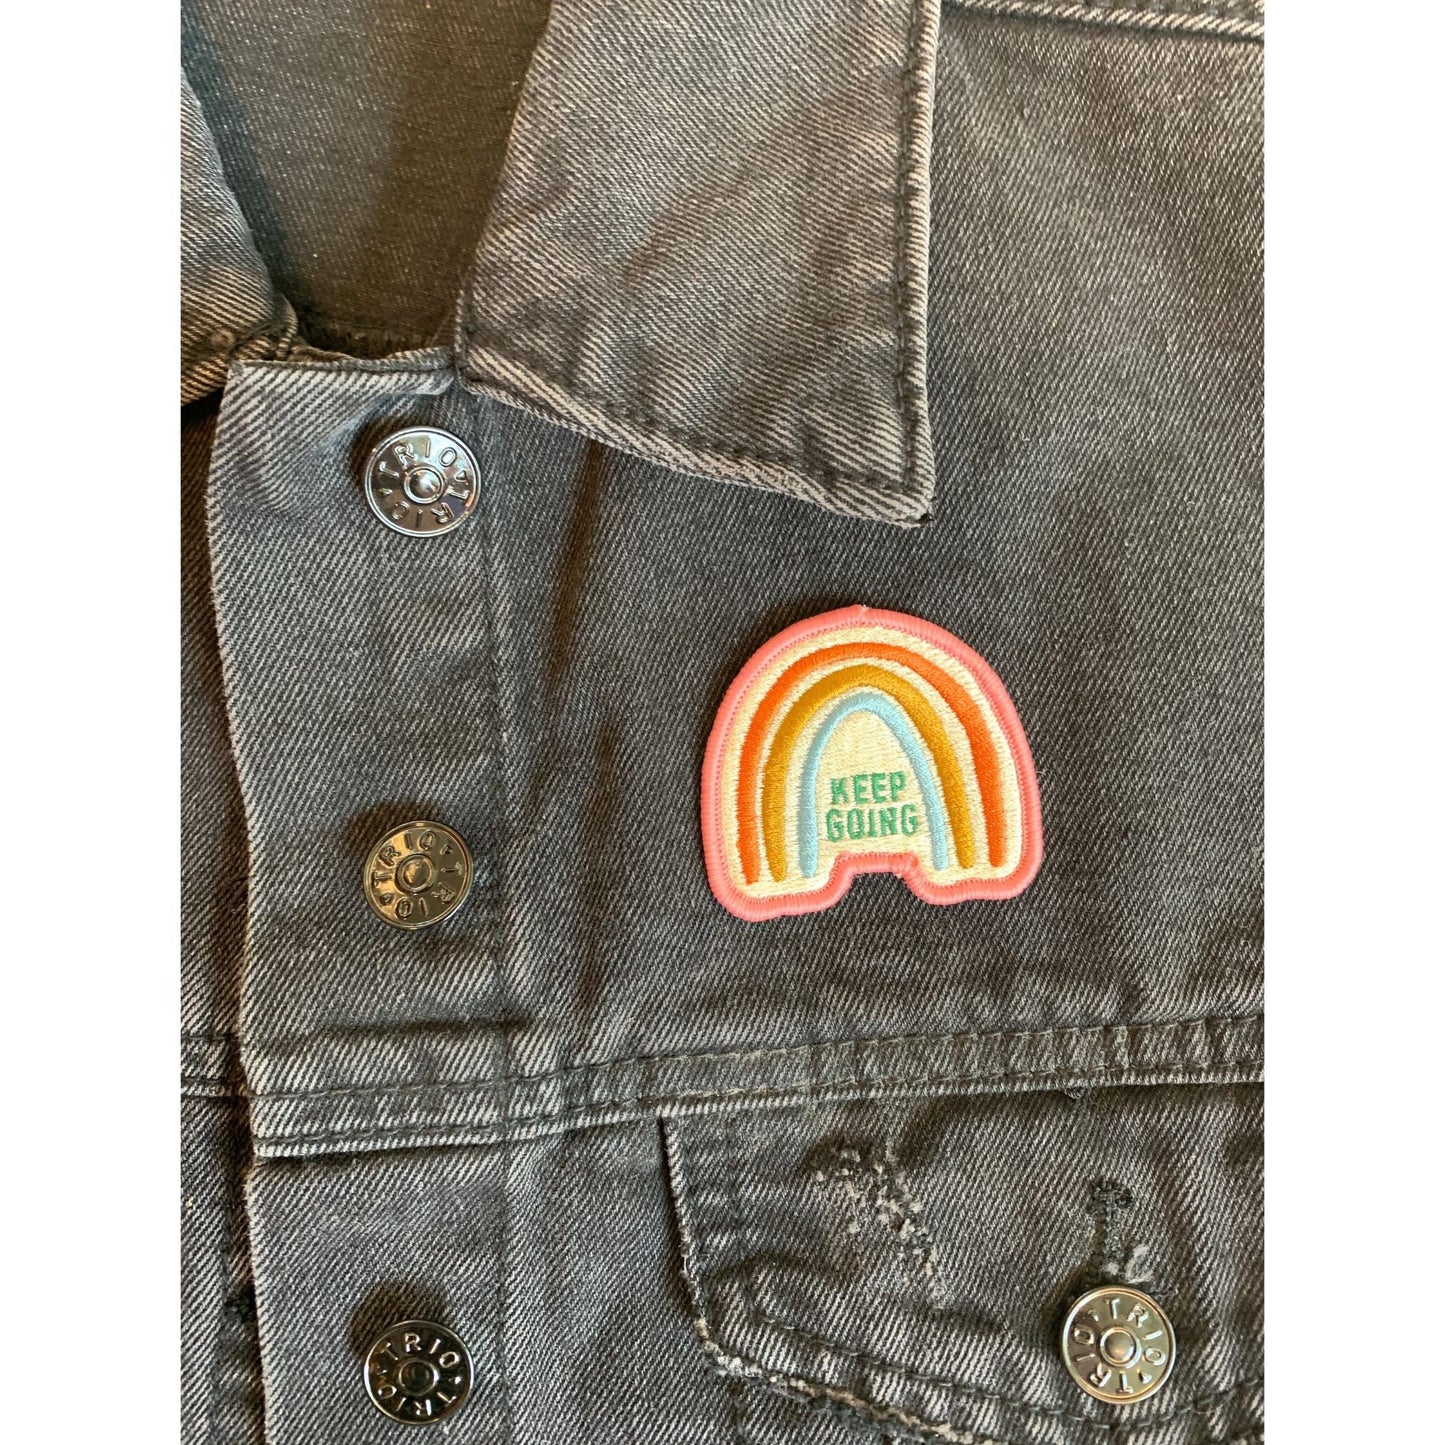 Keep Going Iron-On Patch in Rainbow Design | Embroidered Heat-transfer Patch